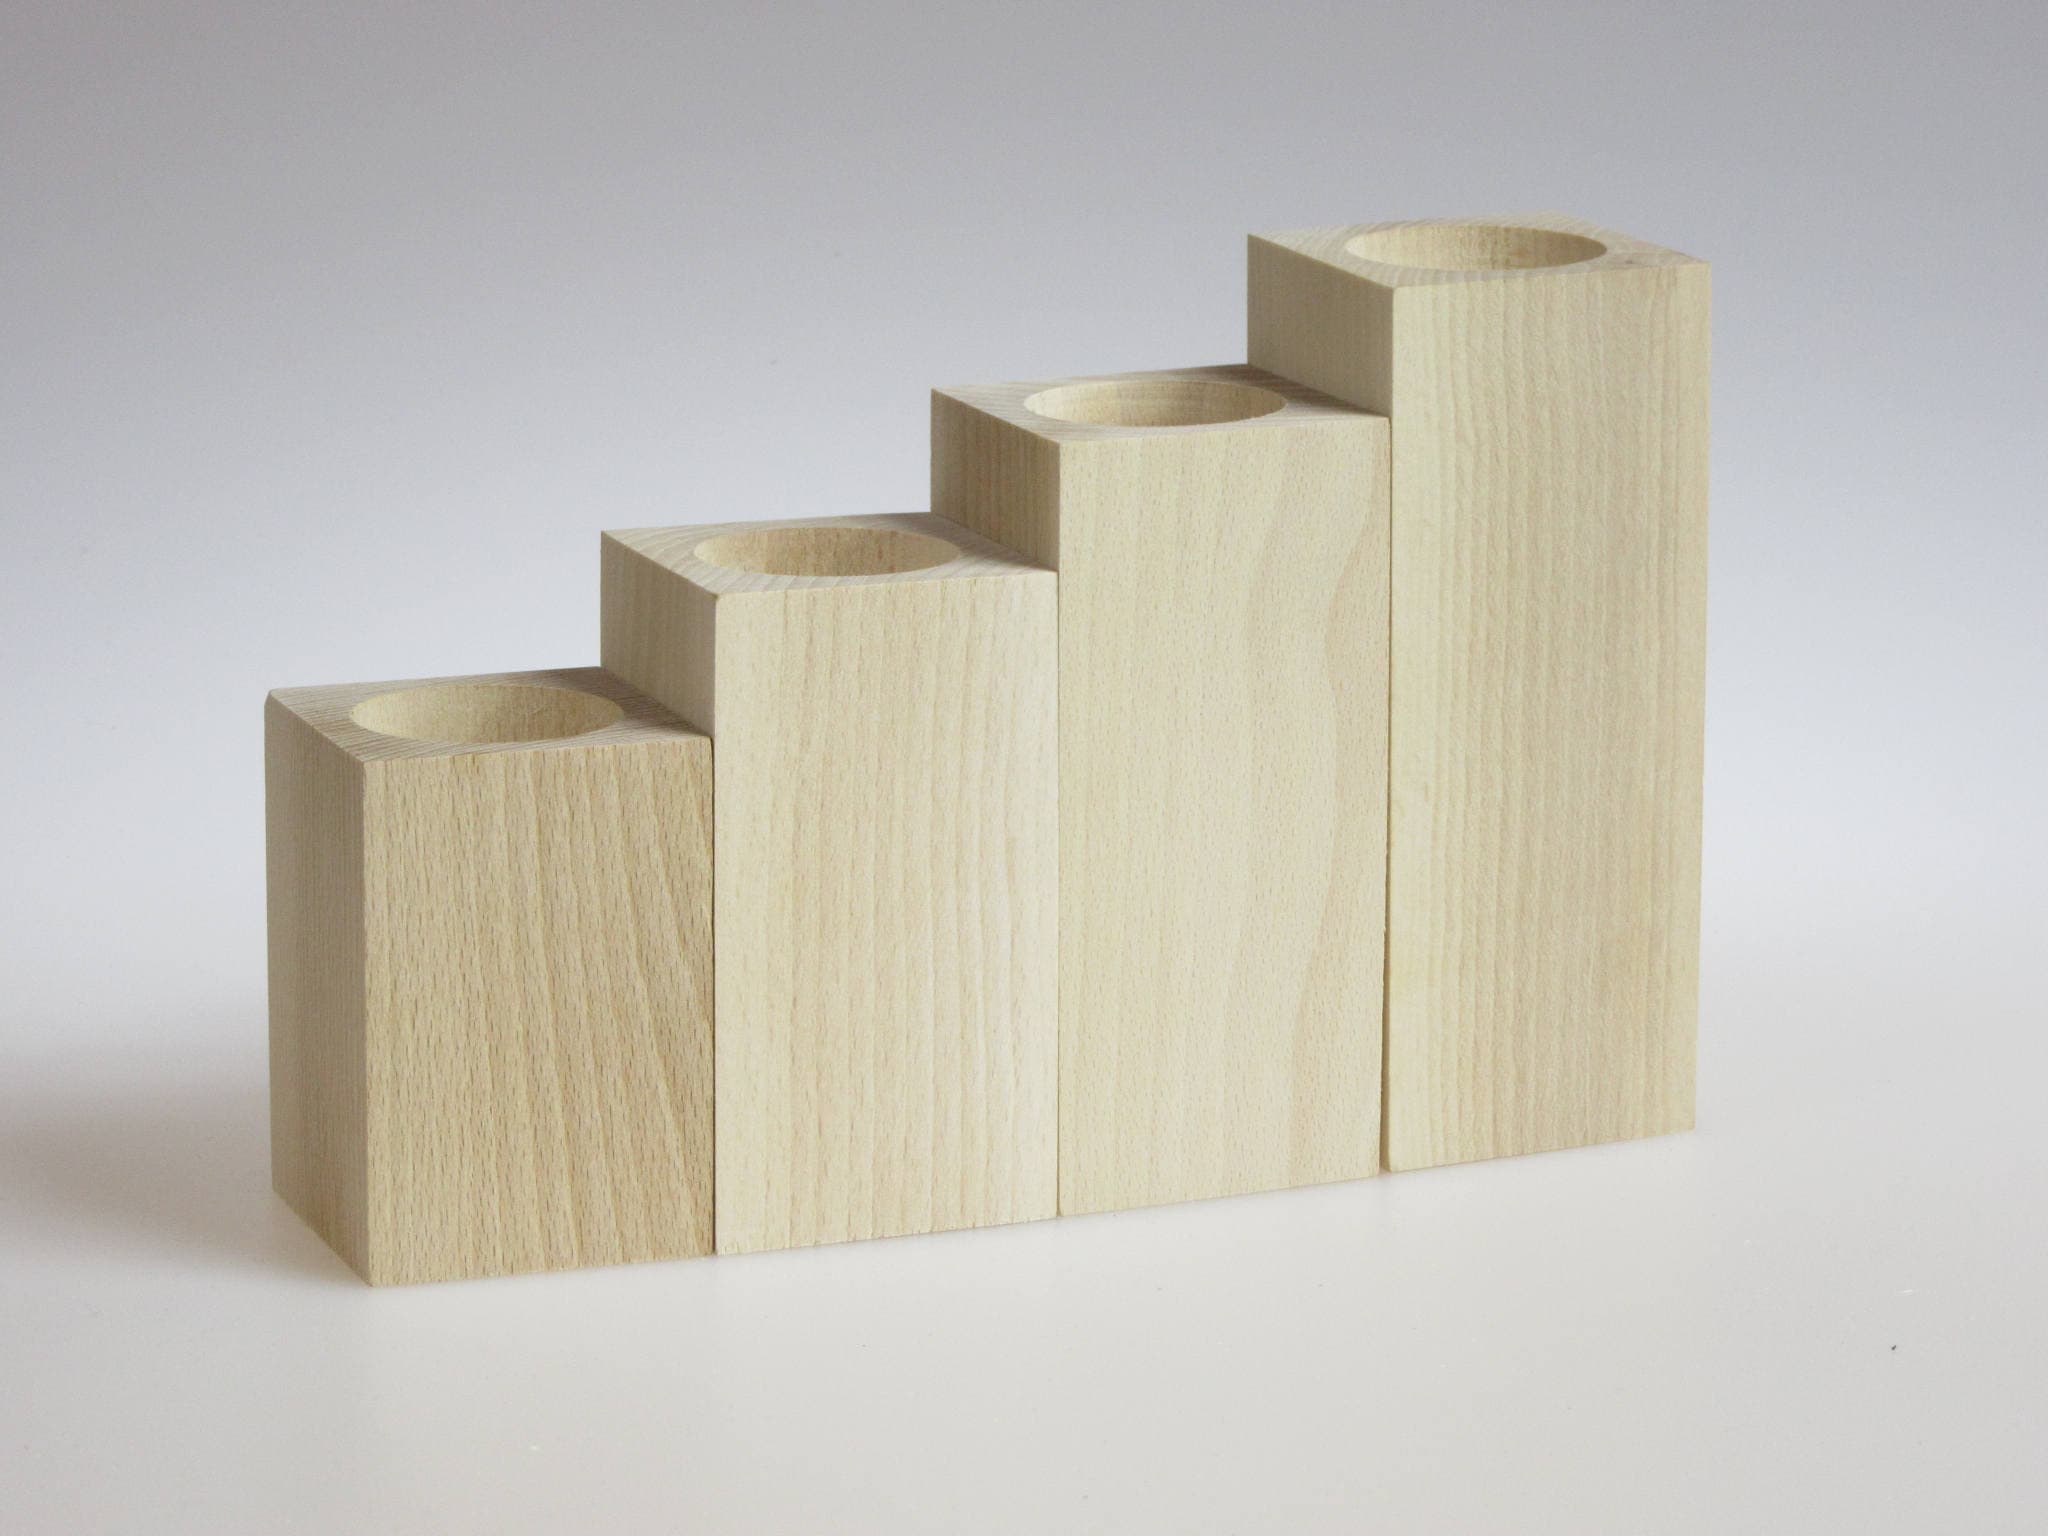 Stunning Hand Made Baby Blocks With Mitered Edges for Display